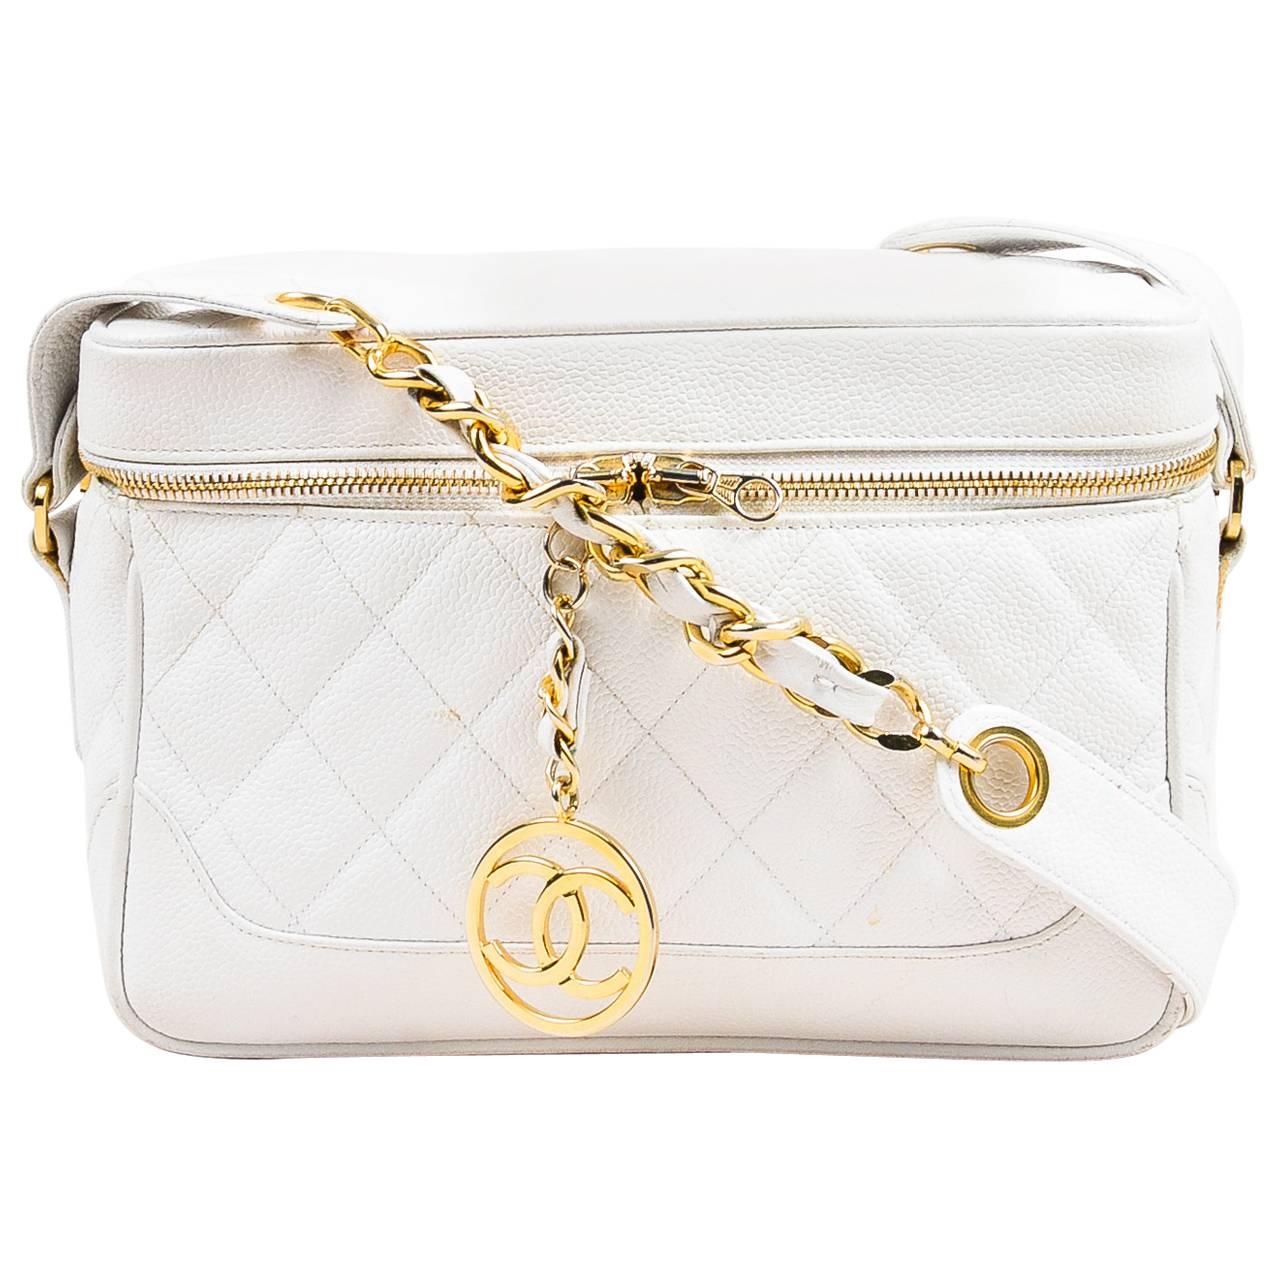 Vintage Chanel White Caviar Leather Quilted Camera Bag For Sale